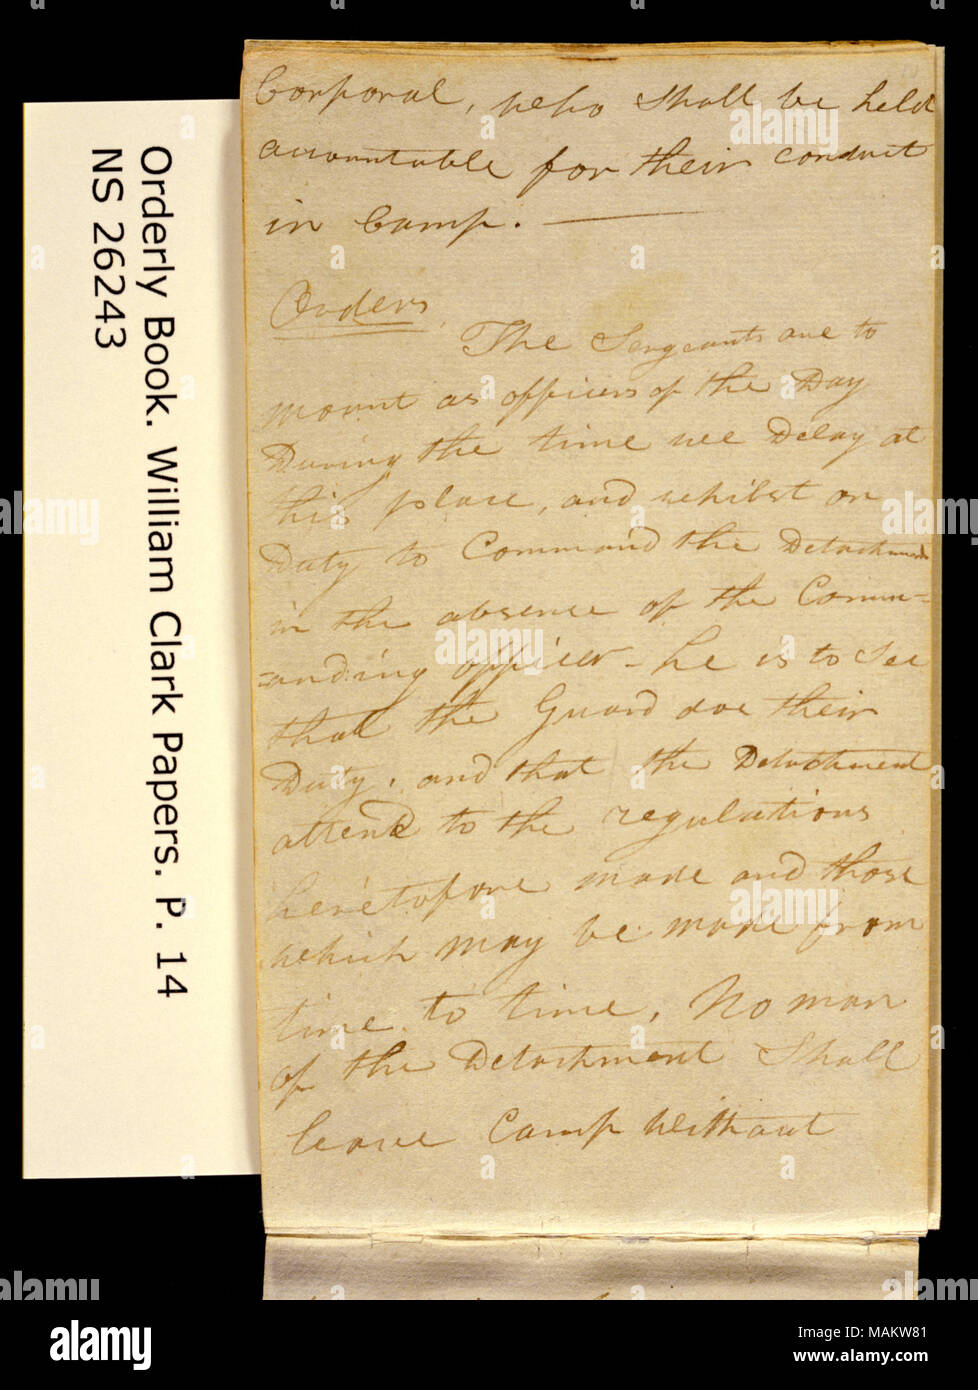 'Camp at River a Dubois, May 4th 1804. Orders cont.' Title: Clark Family Collection: Volume 20. Orderly book, page 14, May 4, 1804  . 4 May 1804. Clark, William, 1770-1838 Stock Photo